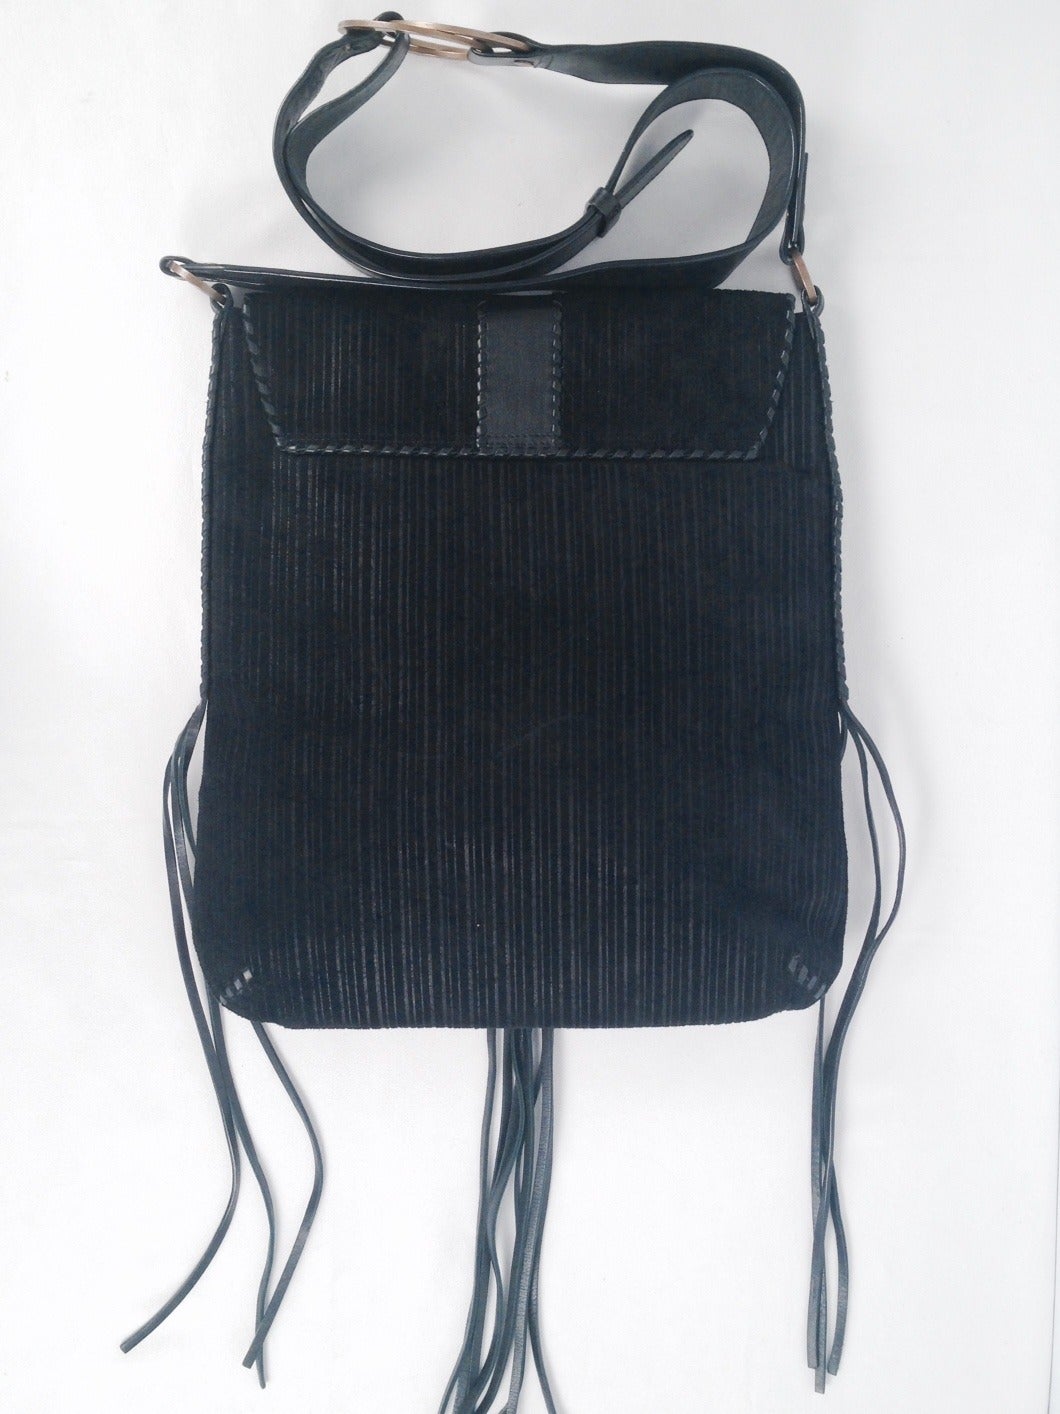 Givenchy Leather and Suede Crossbody Bag with Fringe is a nod to the past and 